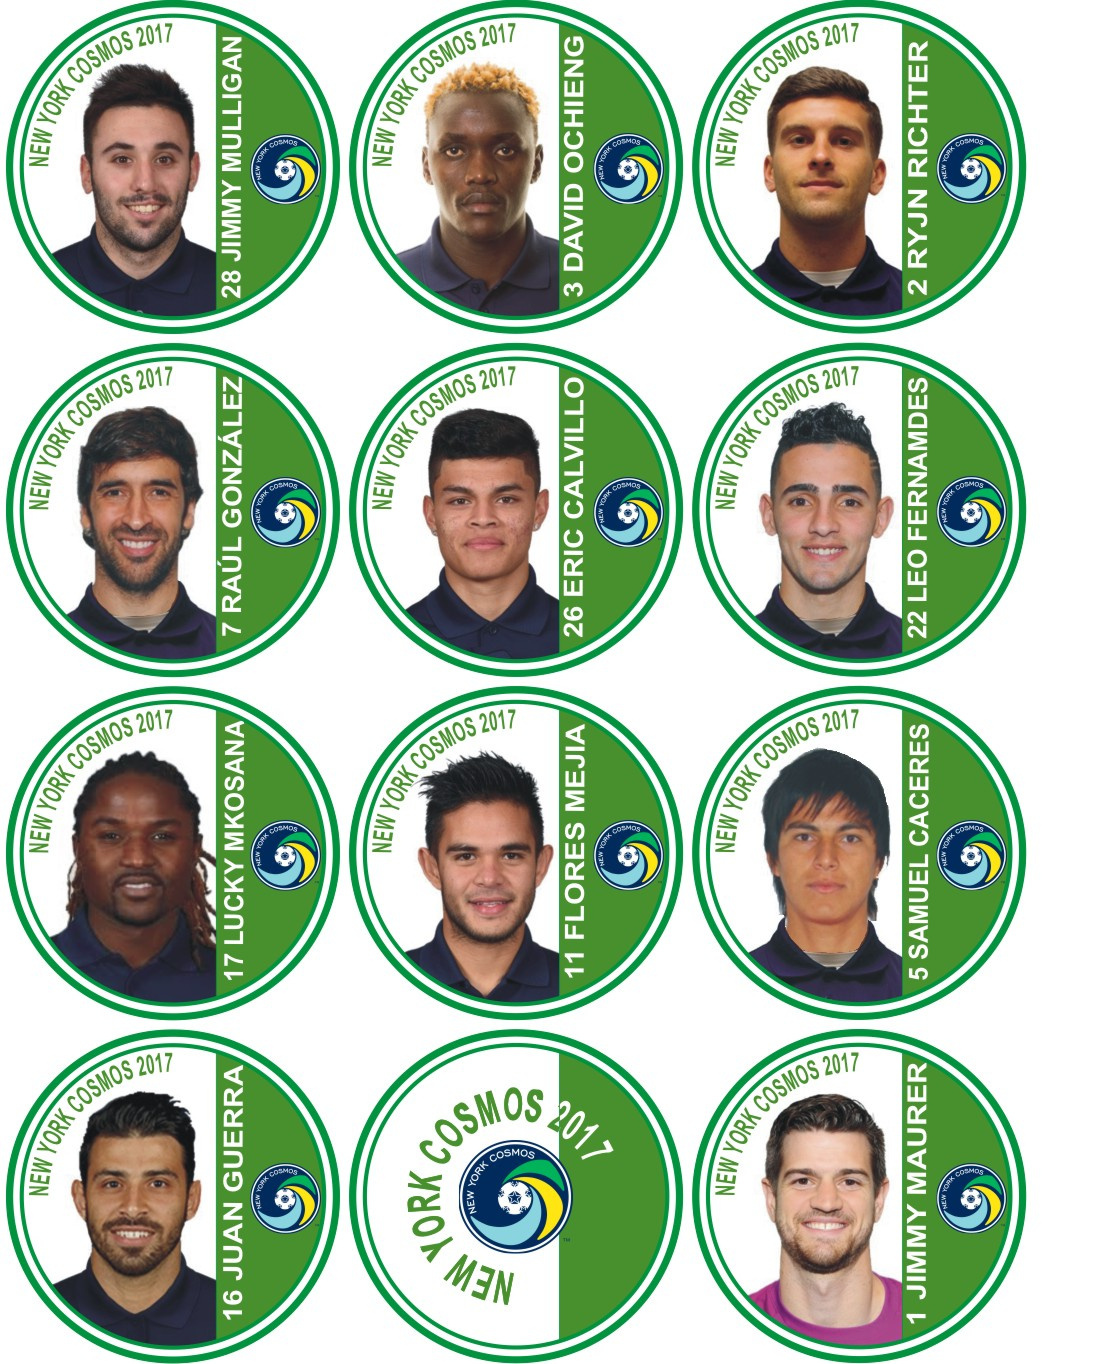 2017 NYCOSMOS